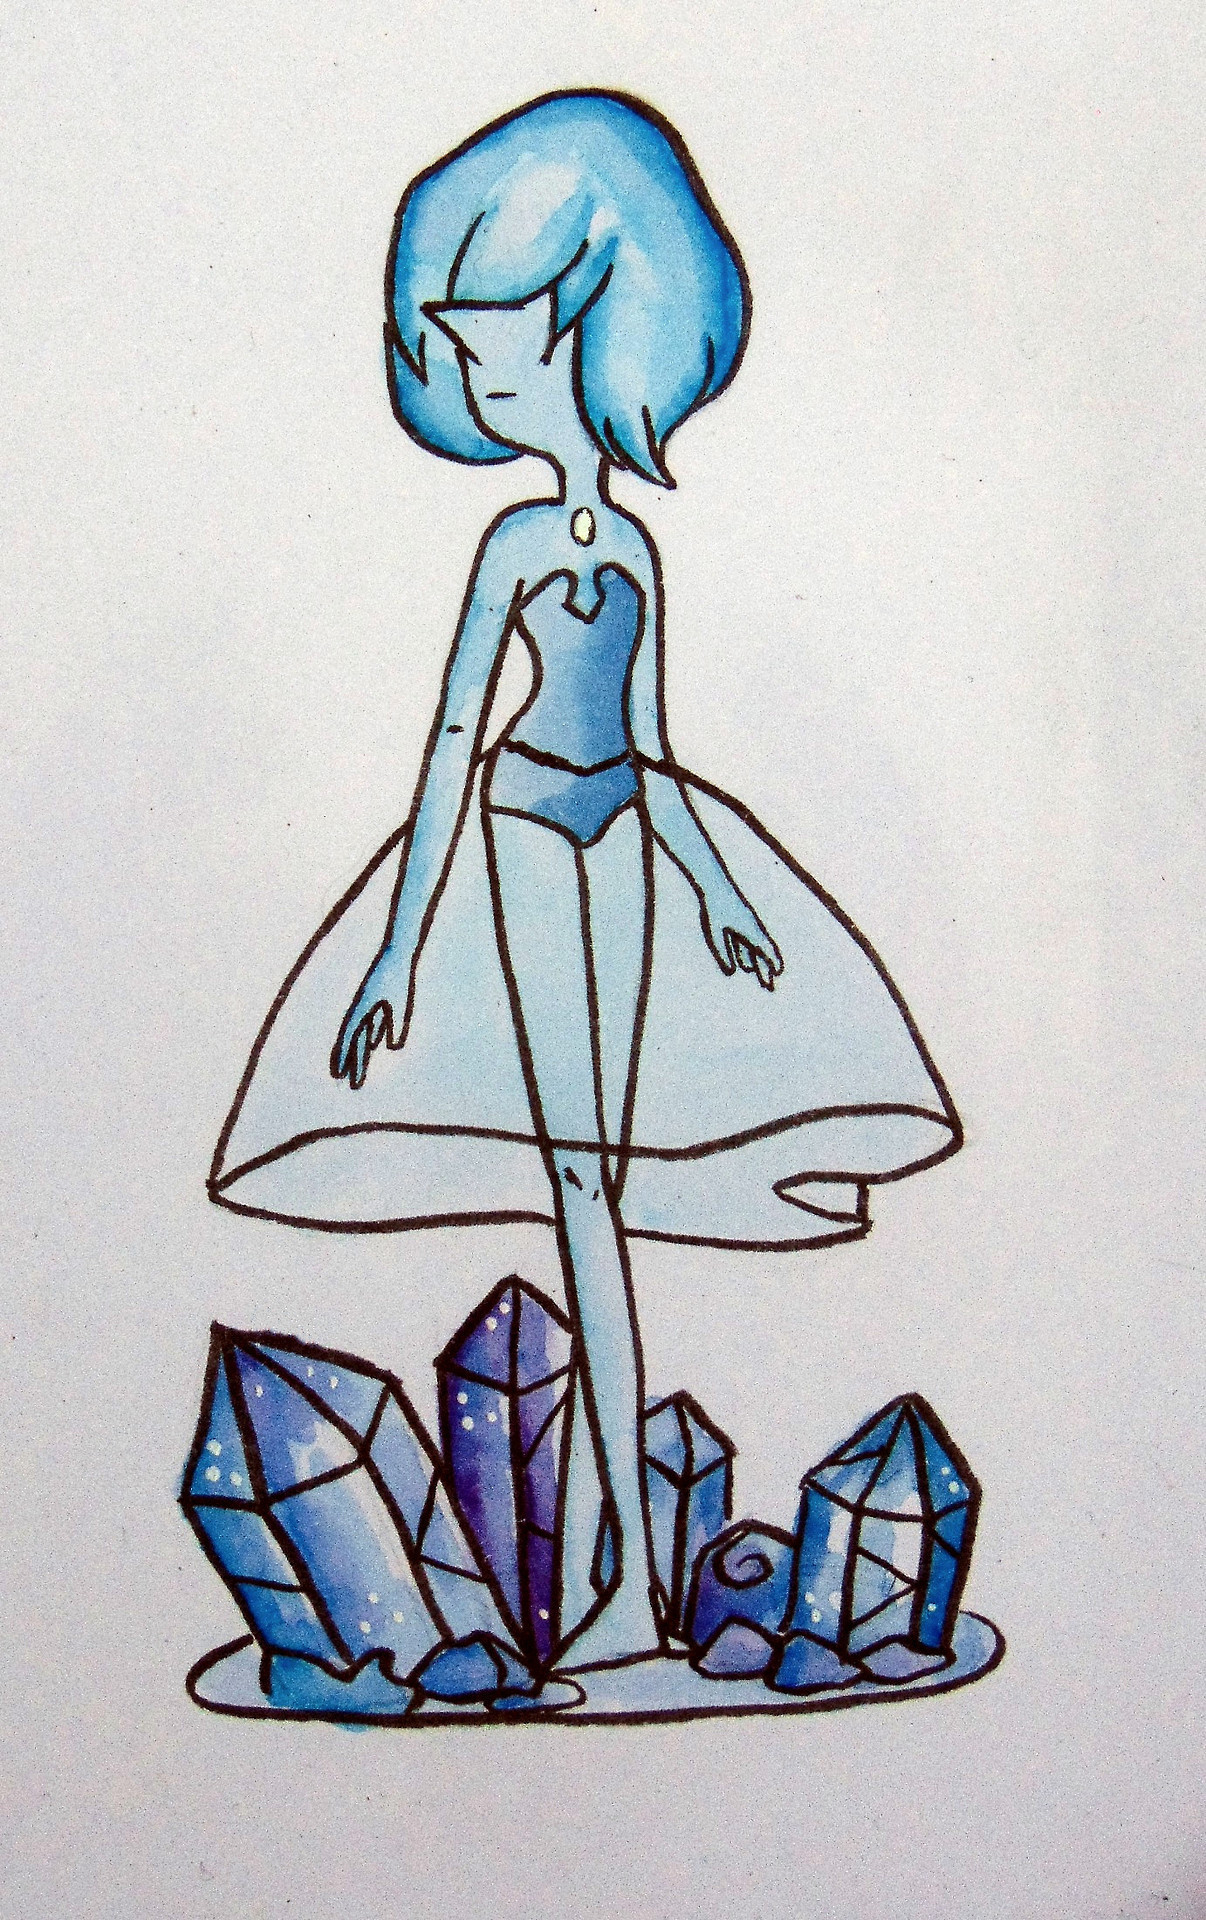 I love blue pearl. Seriously when will come new episodes? The waiting sucks.